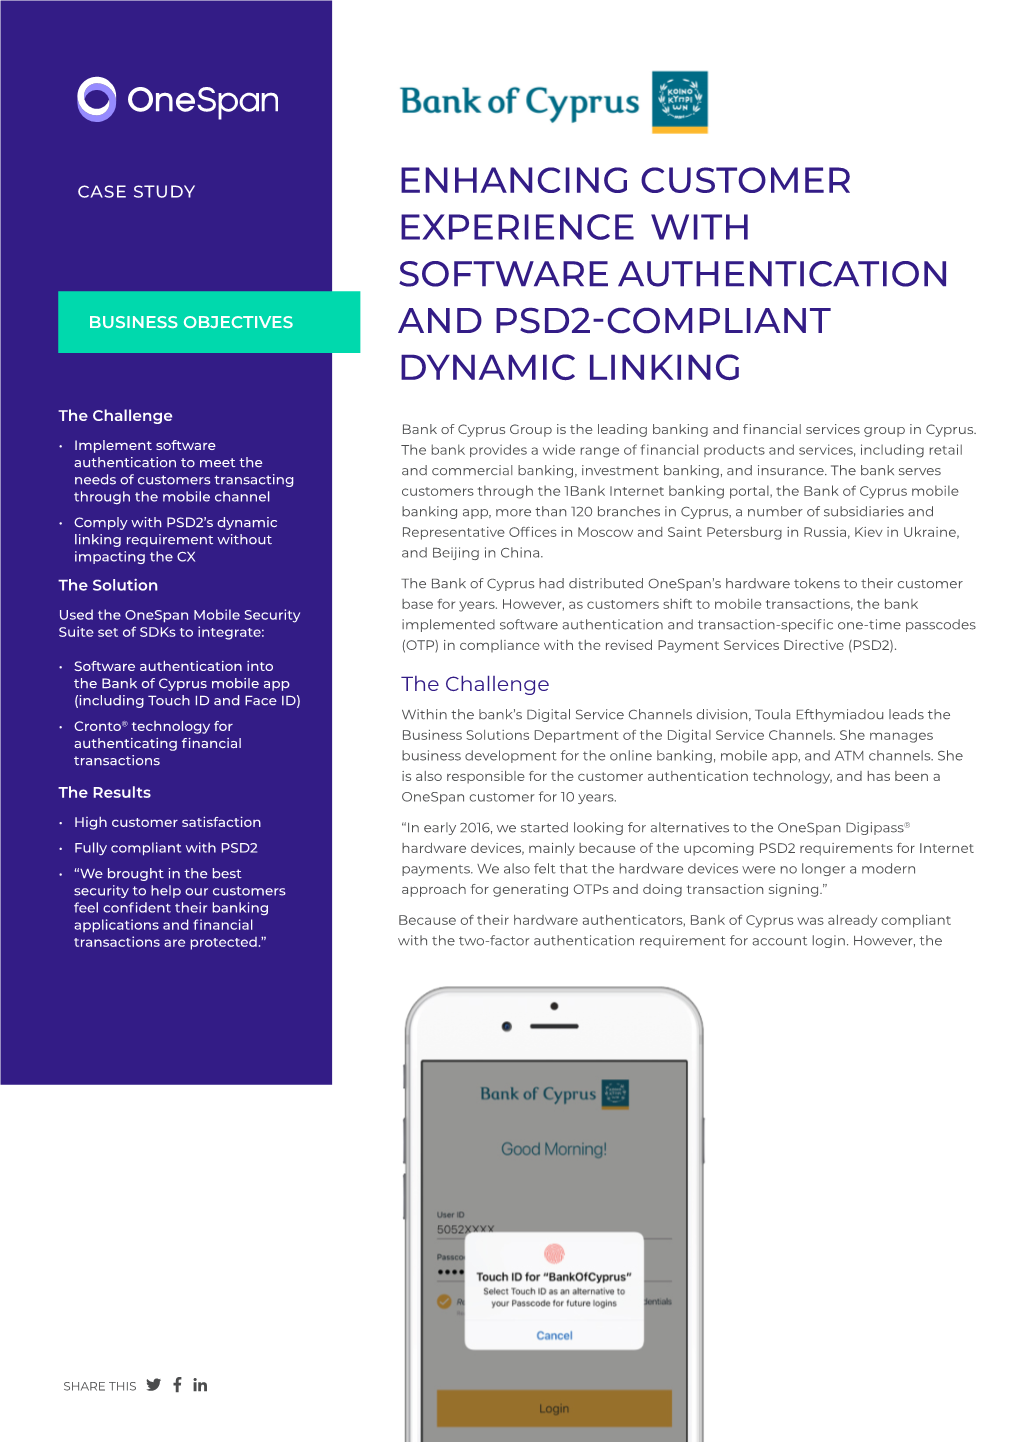 Enhancing Customer Experience with Software Authentication and Psd2-Compliant Dynamic Linking